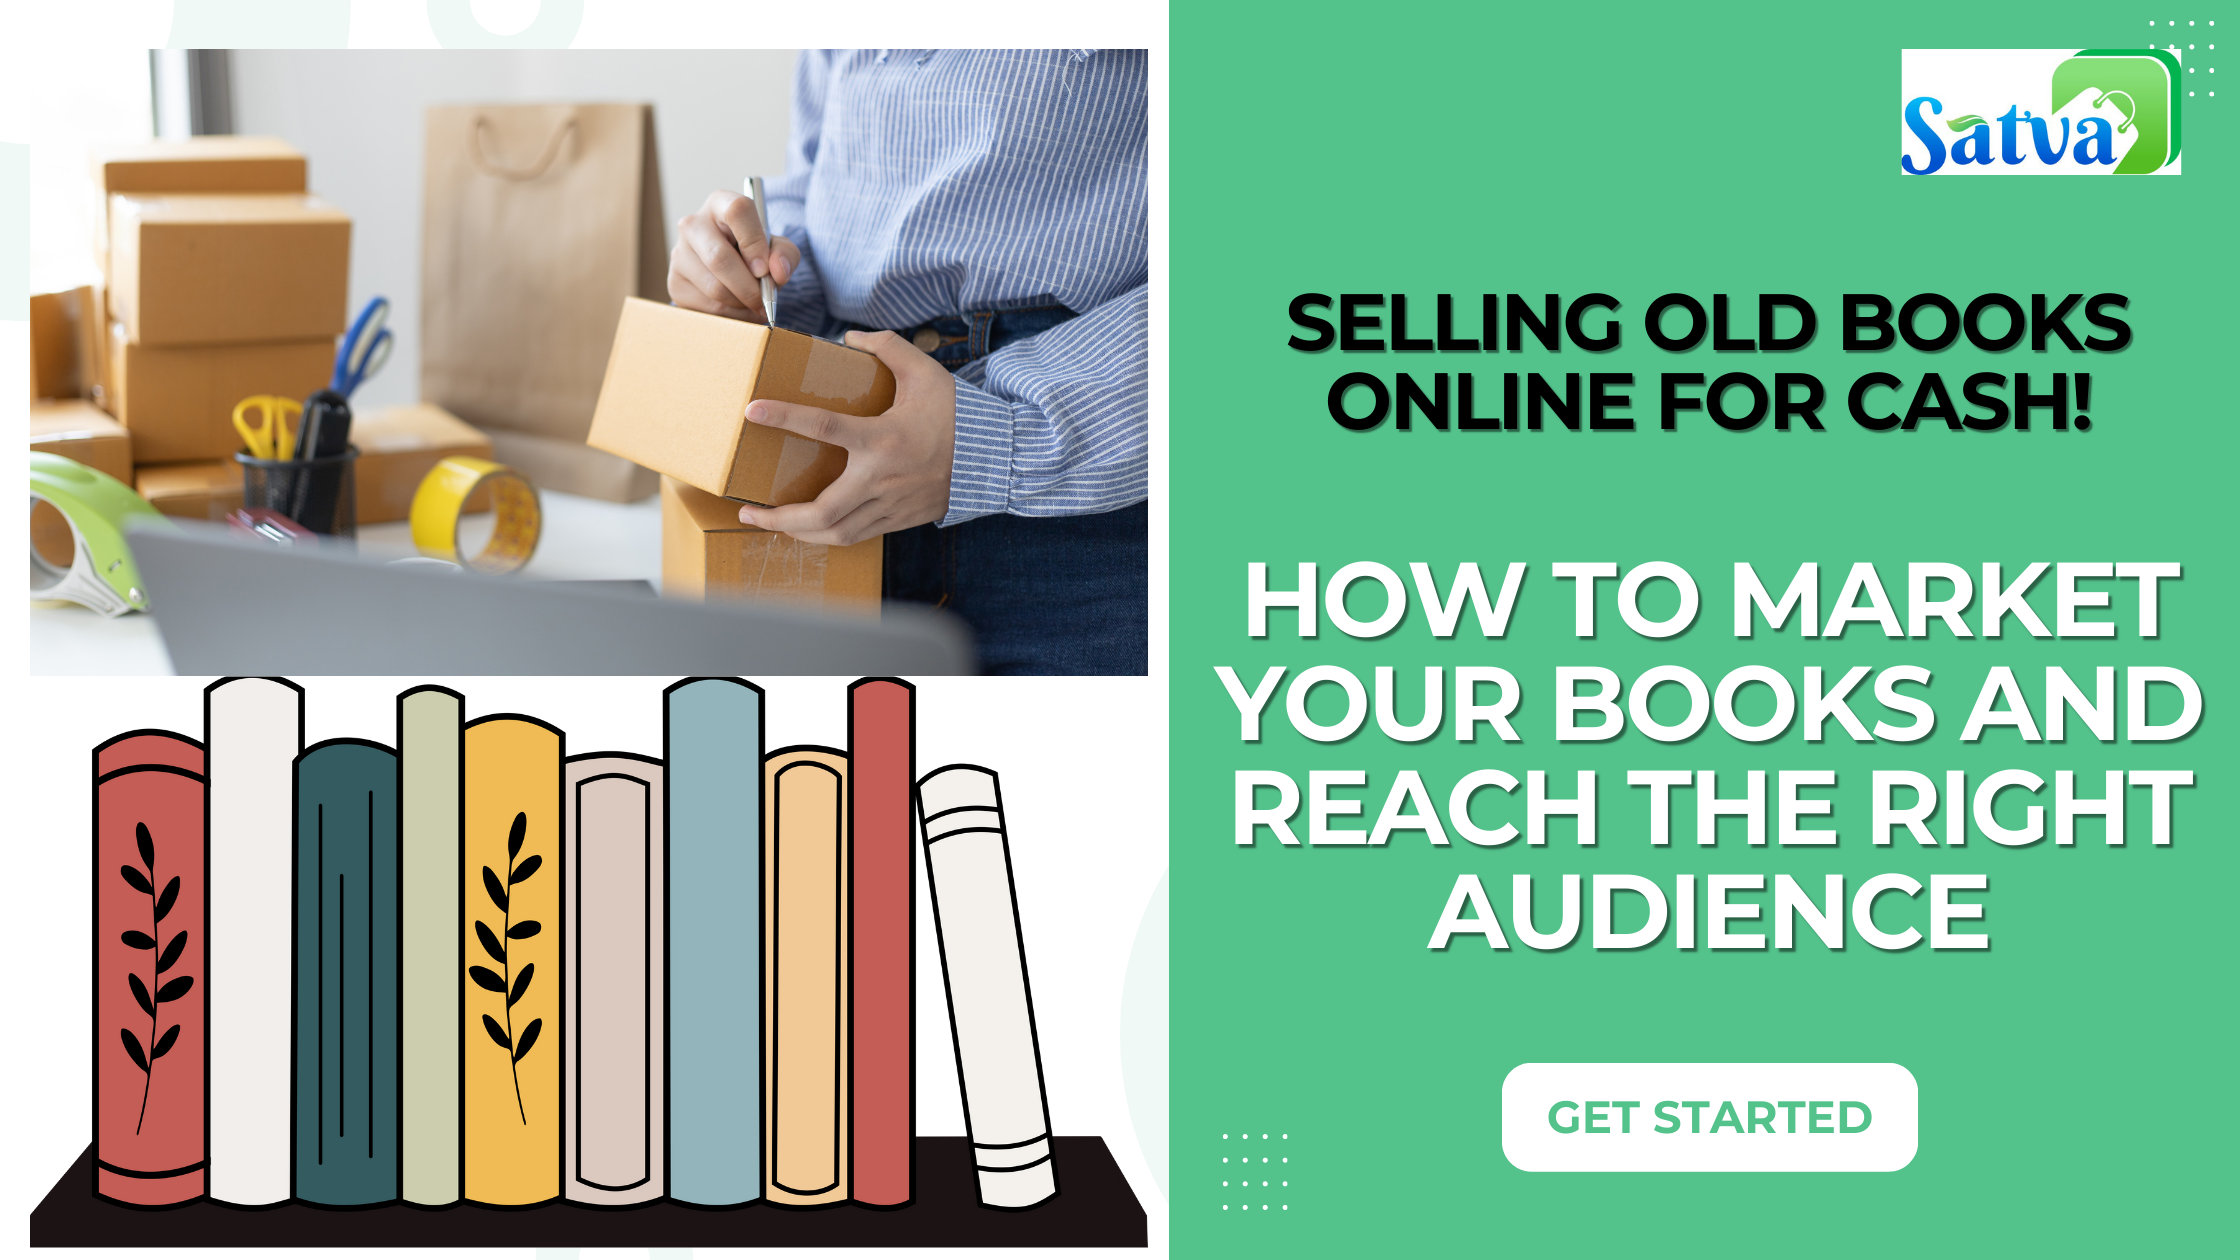 Discover the secrets of selling old books online for cash. Market your books effectively, reach the right audience, and sell with ease using Satva. Start earning from your decluttering journey today!